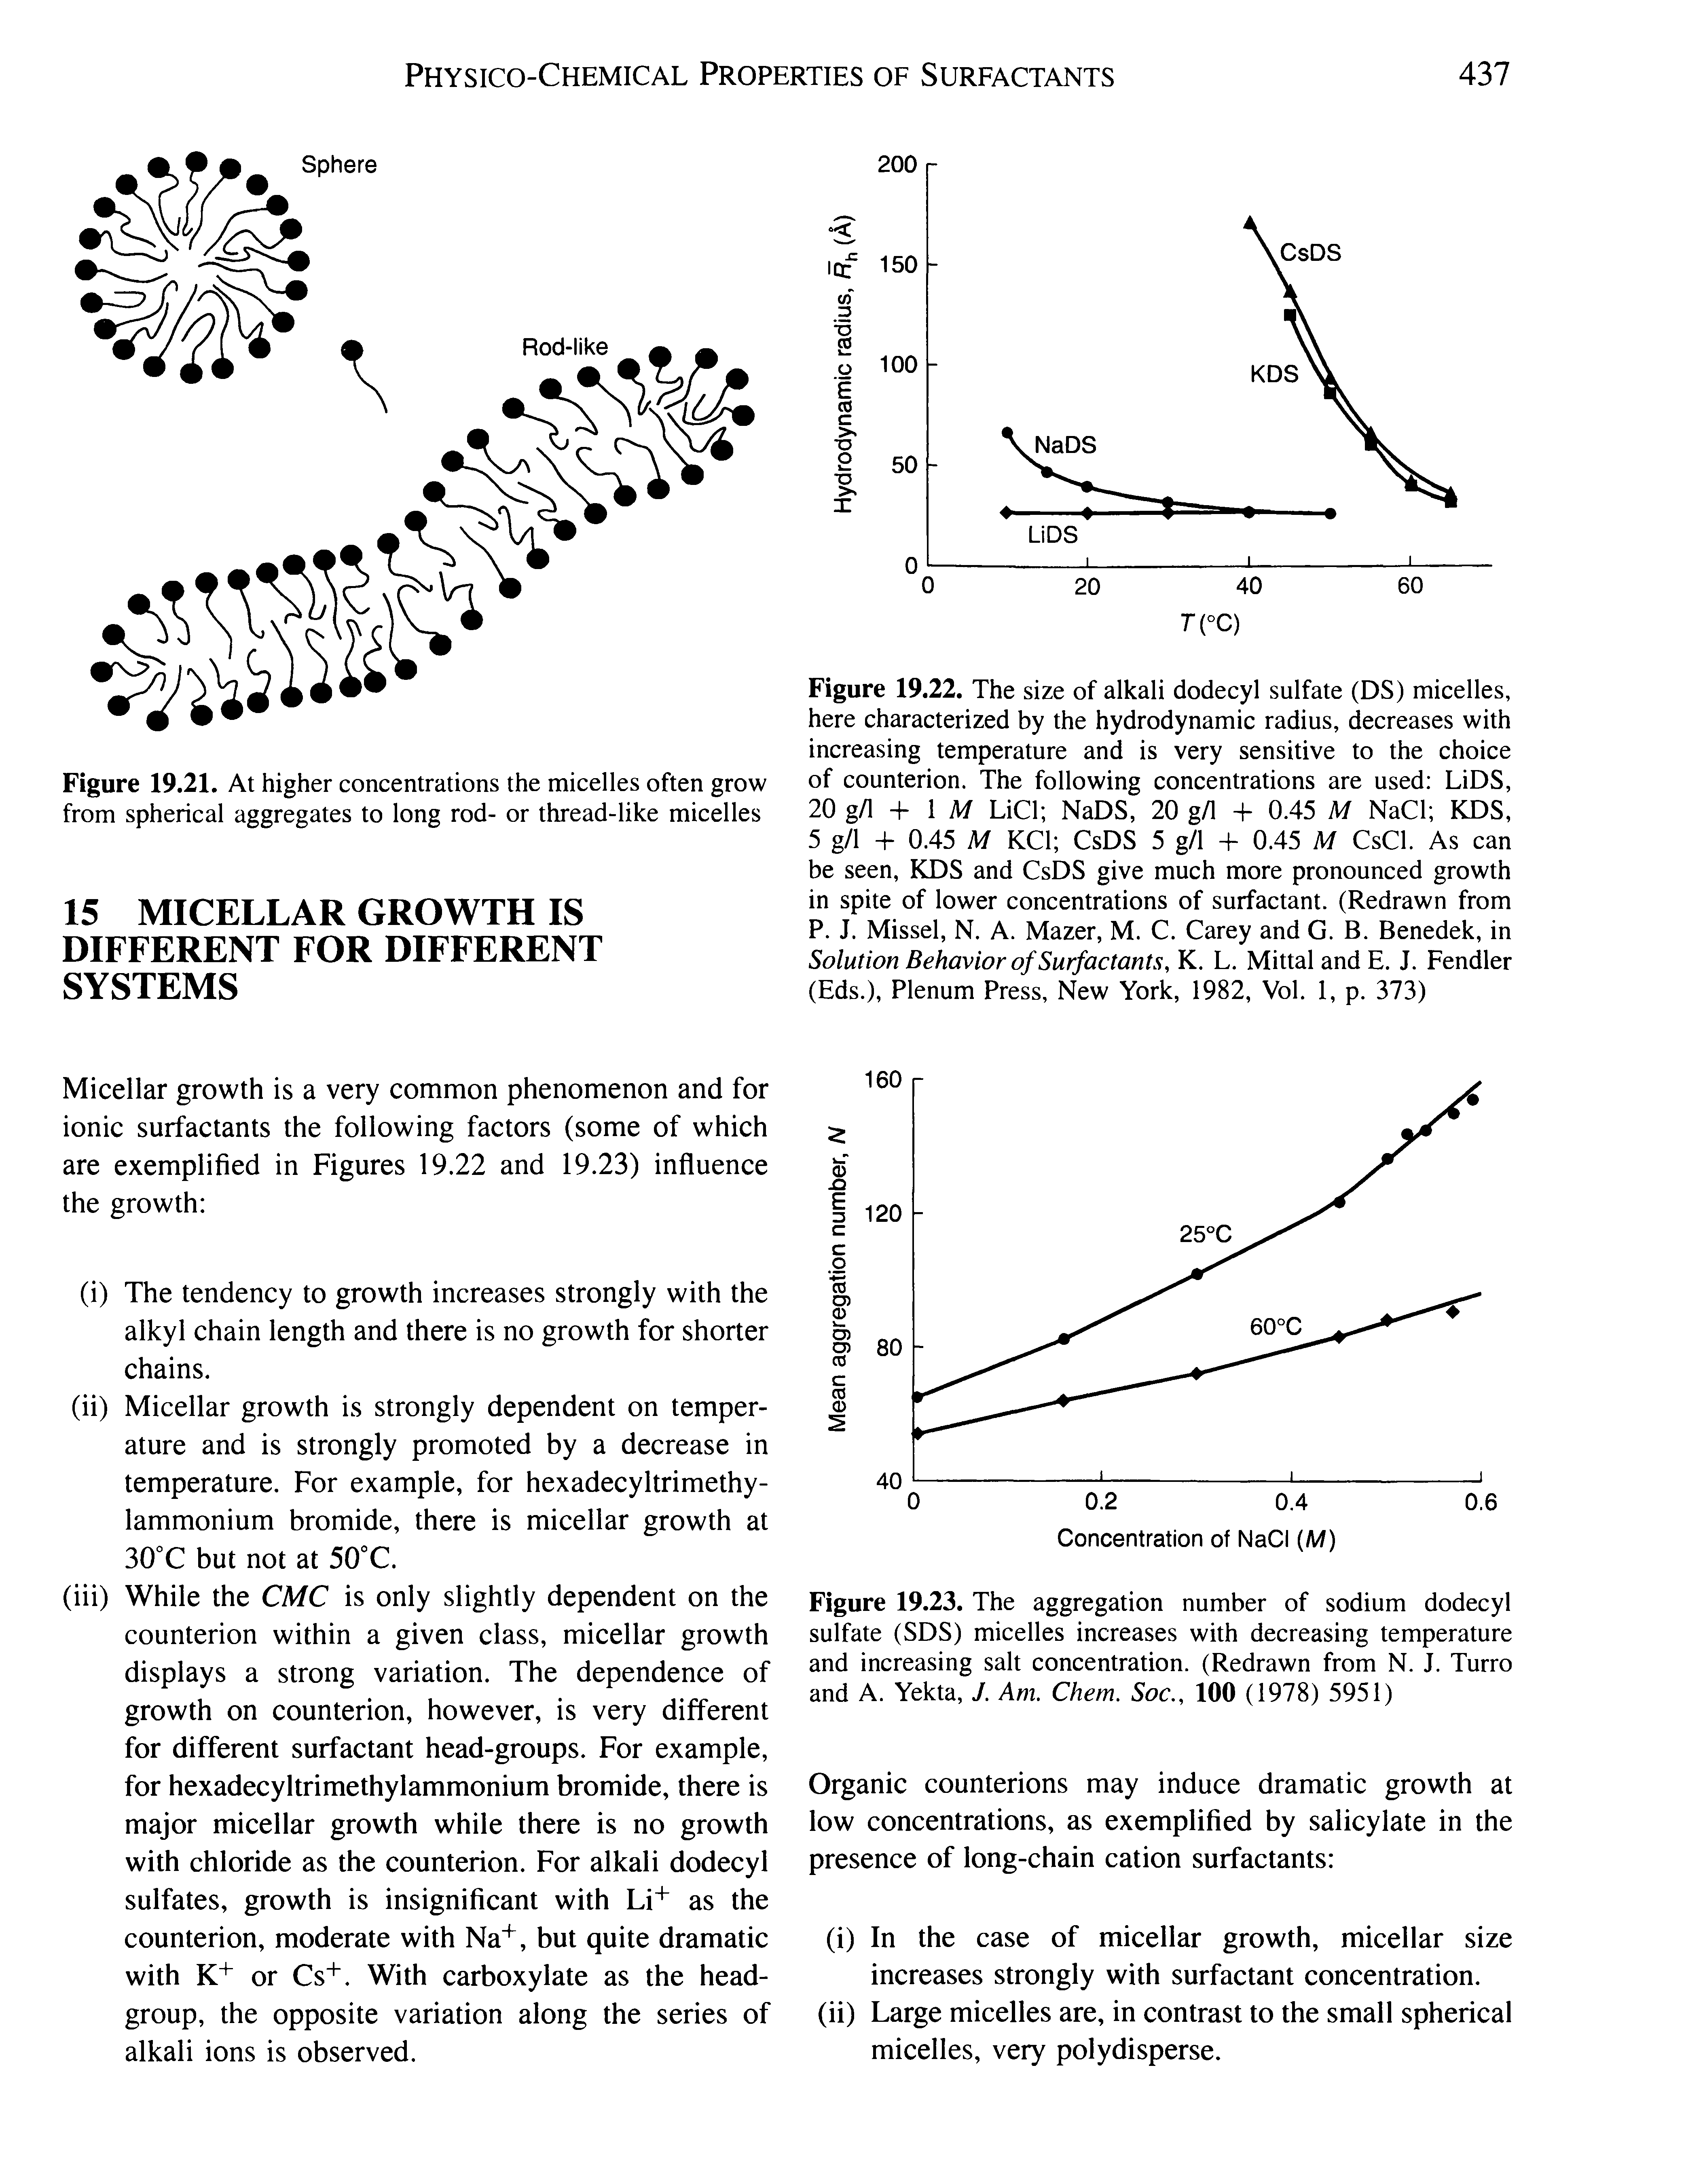 Figure 19.23. The aggregation number of sodium dodecyl sulfate (SDS) micelles increases with decreasing temperature and increasing salt concentration. (Redrawn from N. J. Turro and A. Yekta, J. Am. Chem. Soc., 100 (1978) 5951)...